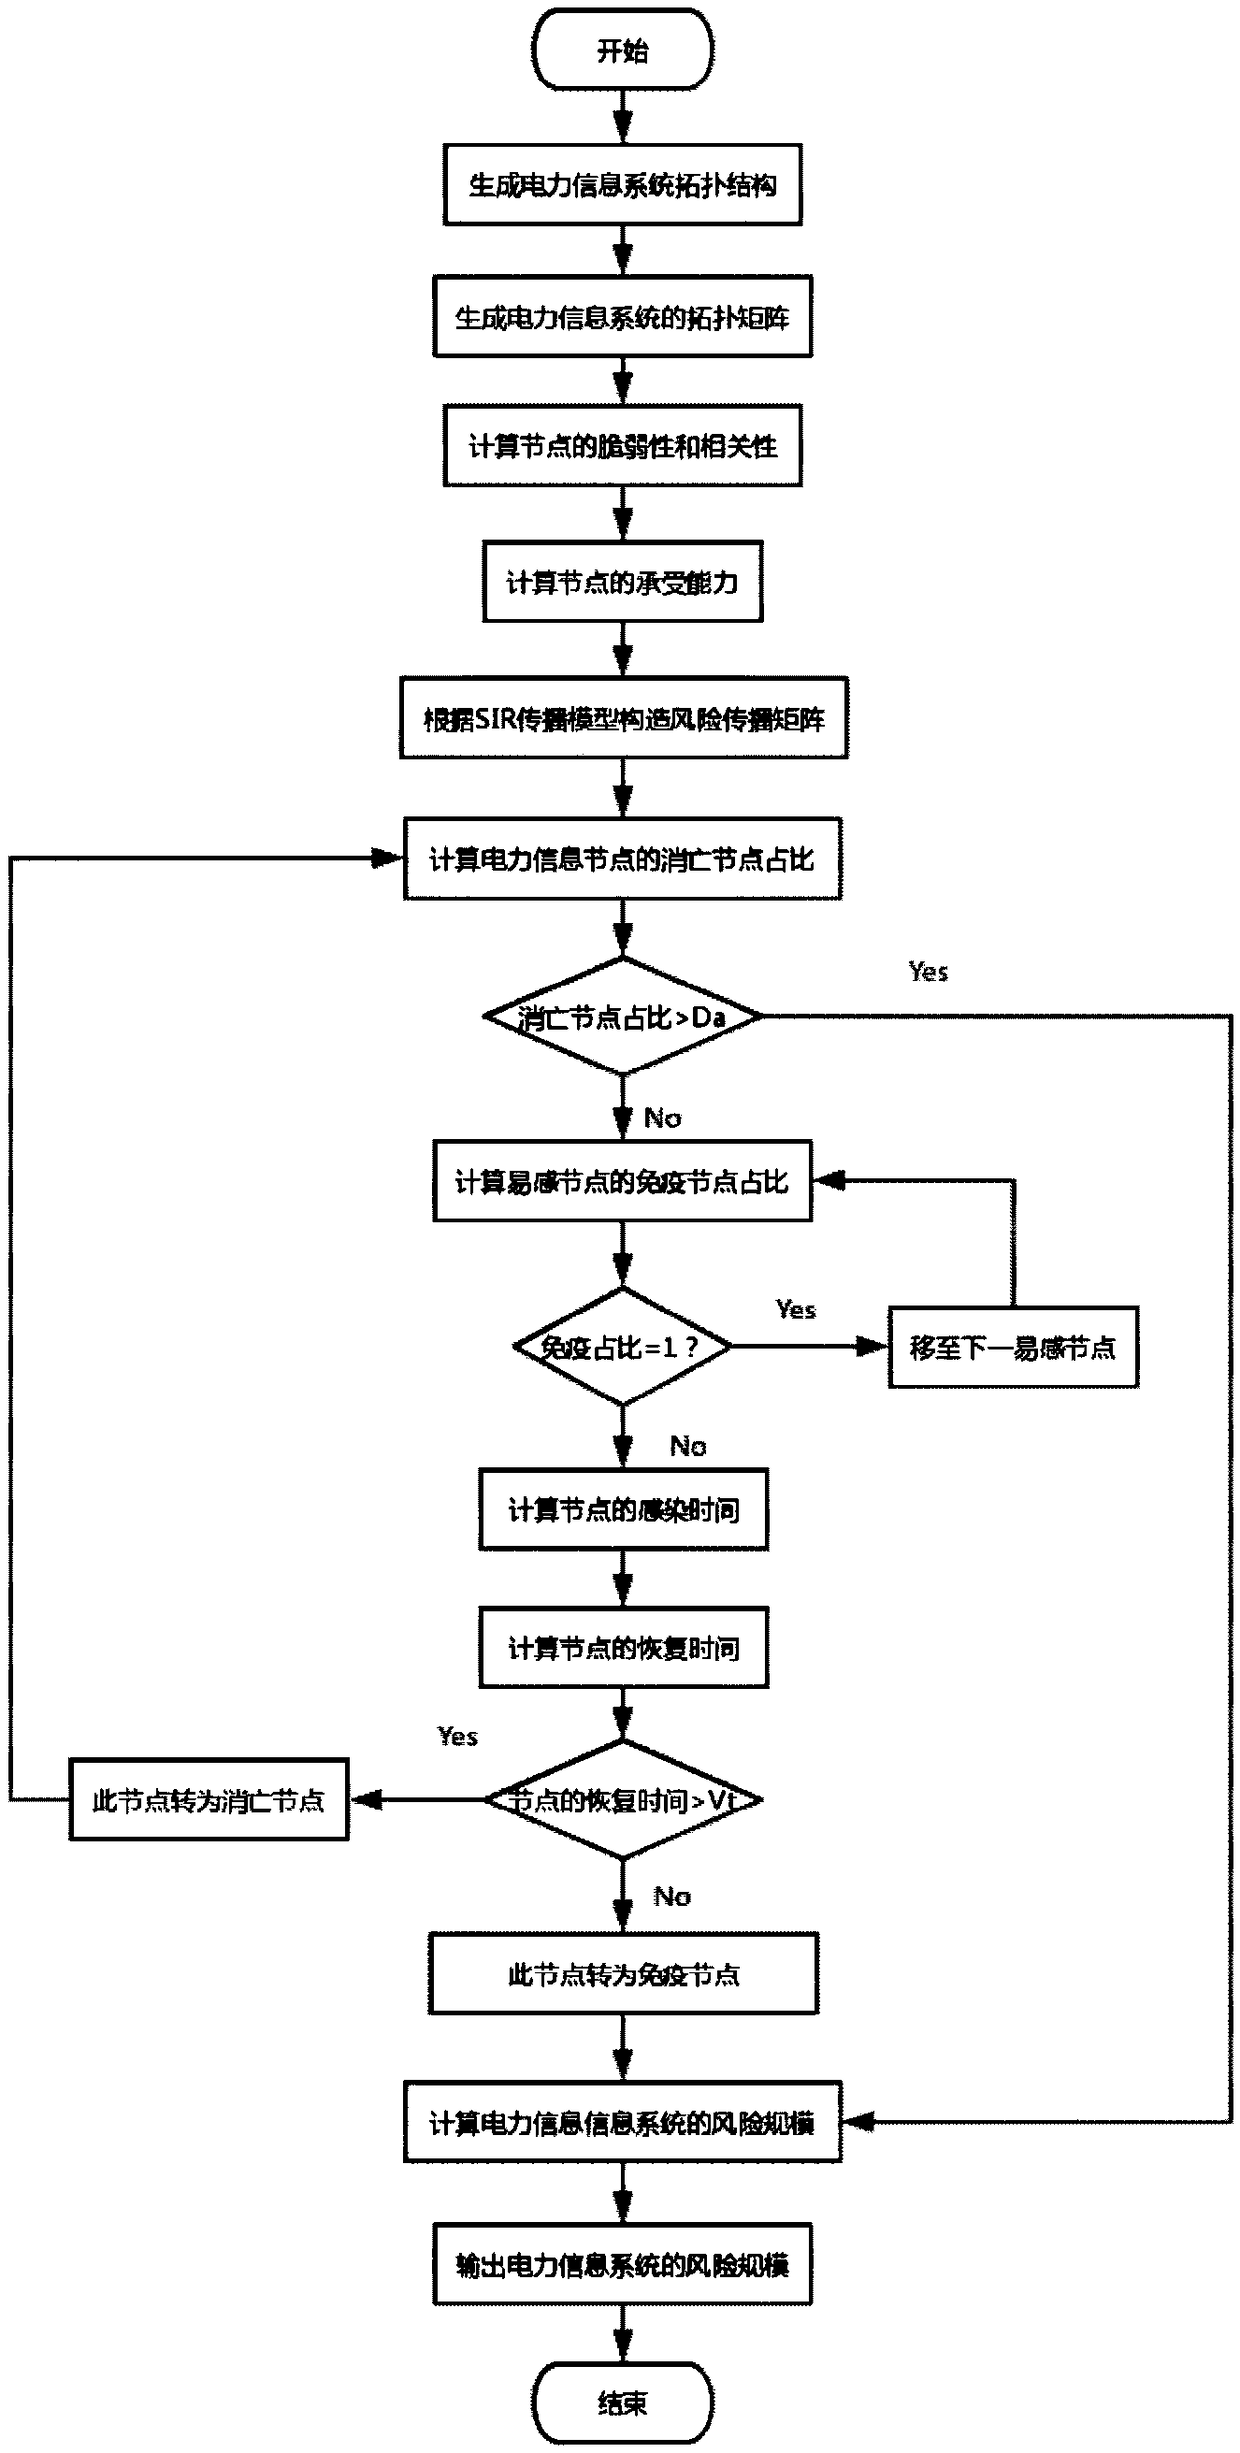 Information security risk propagation control method and apparatus based on infectious disease model